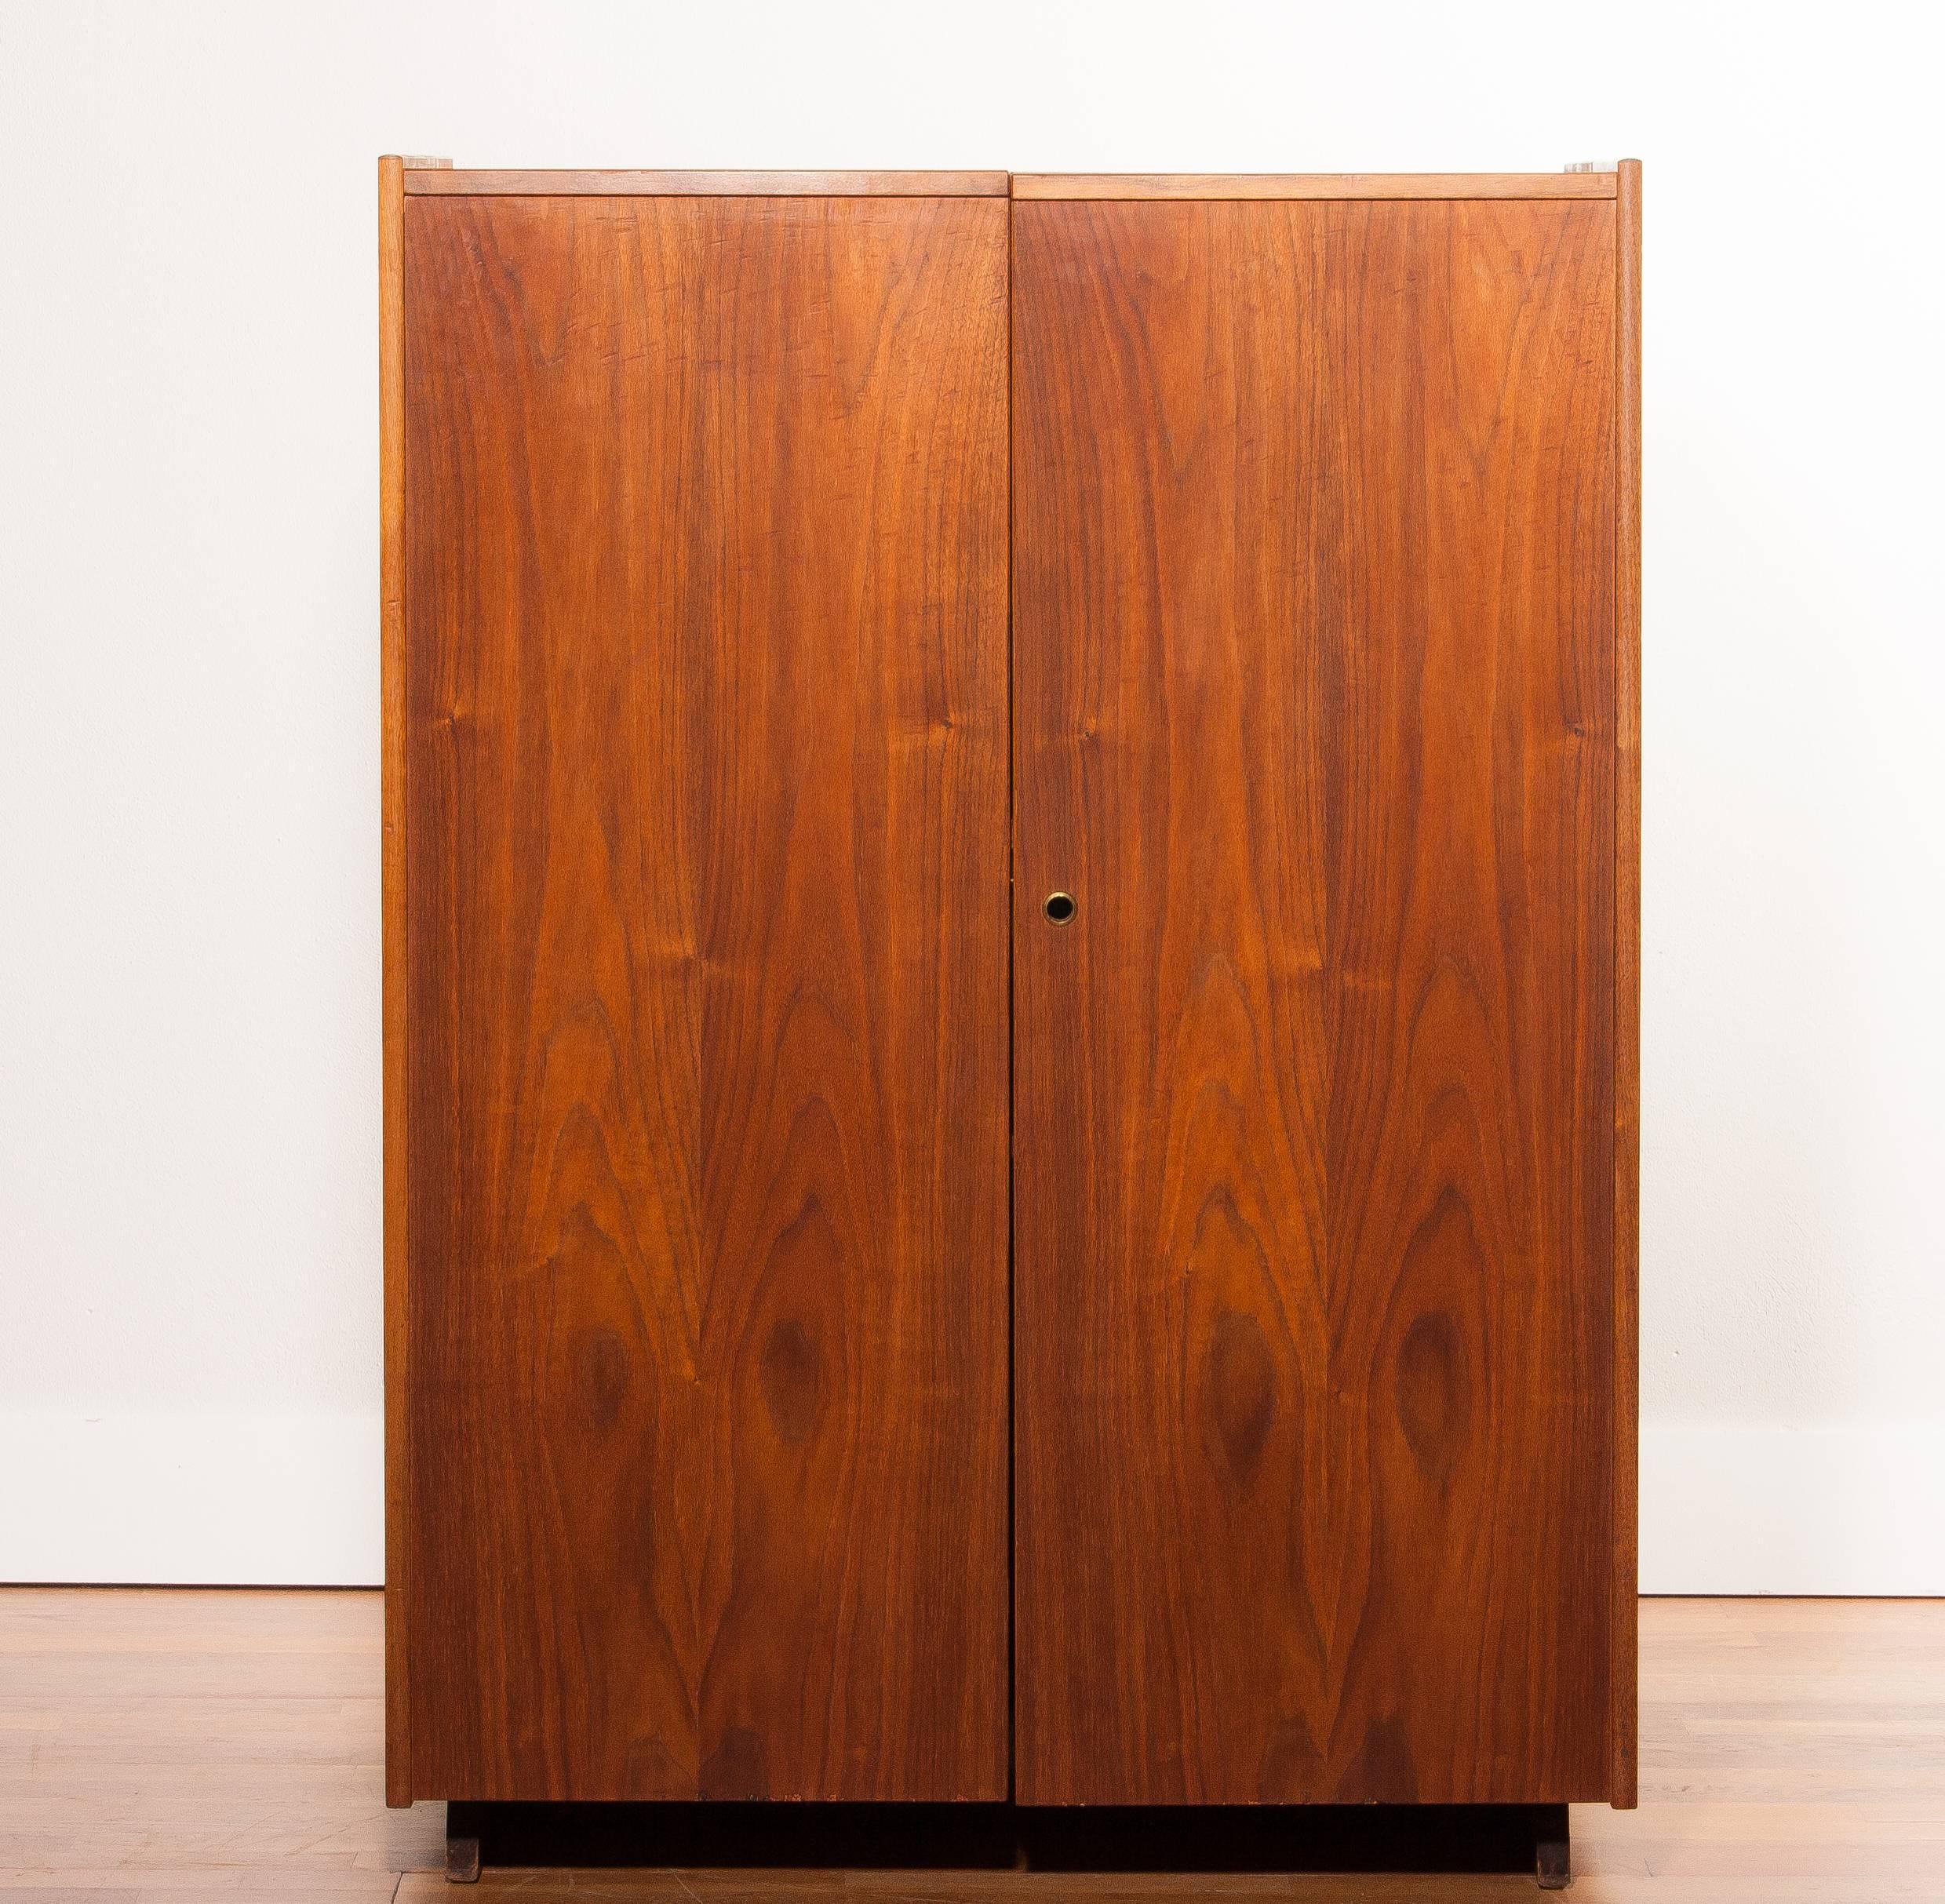 Beautiful teak cabinet and if you open it 'expand' is there going to be an amazing agency.
The office contains a lot of storage space, a sliding desktop with tray and a fold-out working reading lamp.
The cabinet is designed by Mummenthaler &